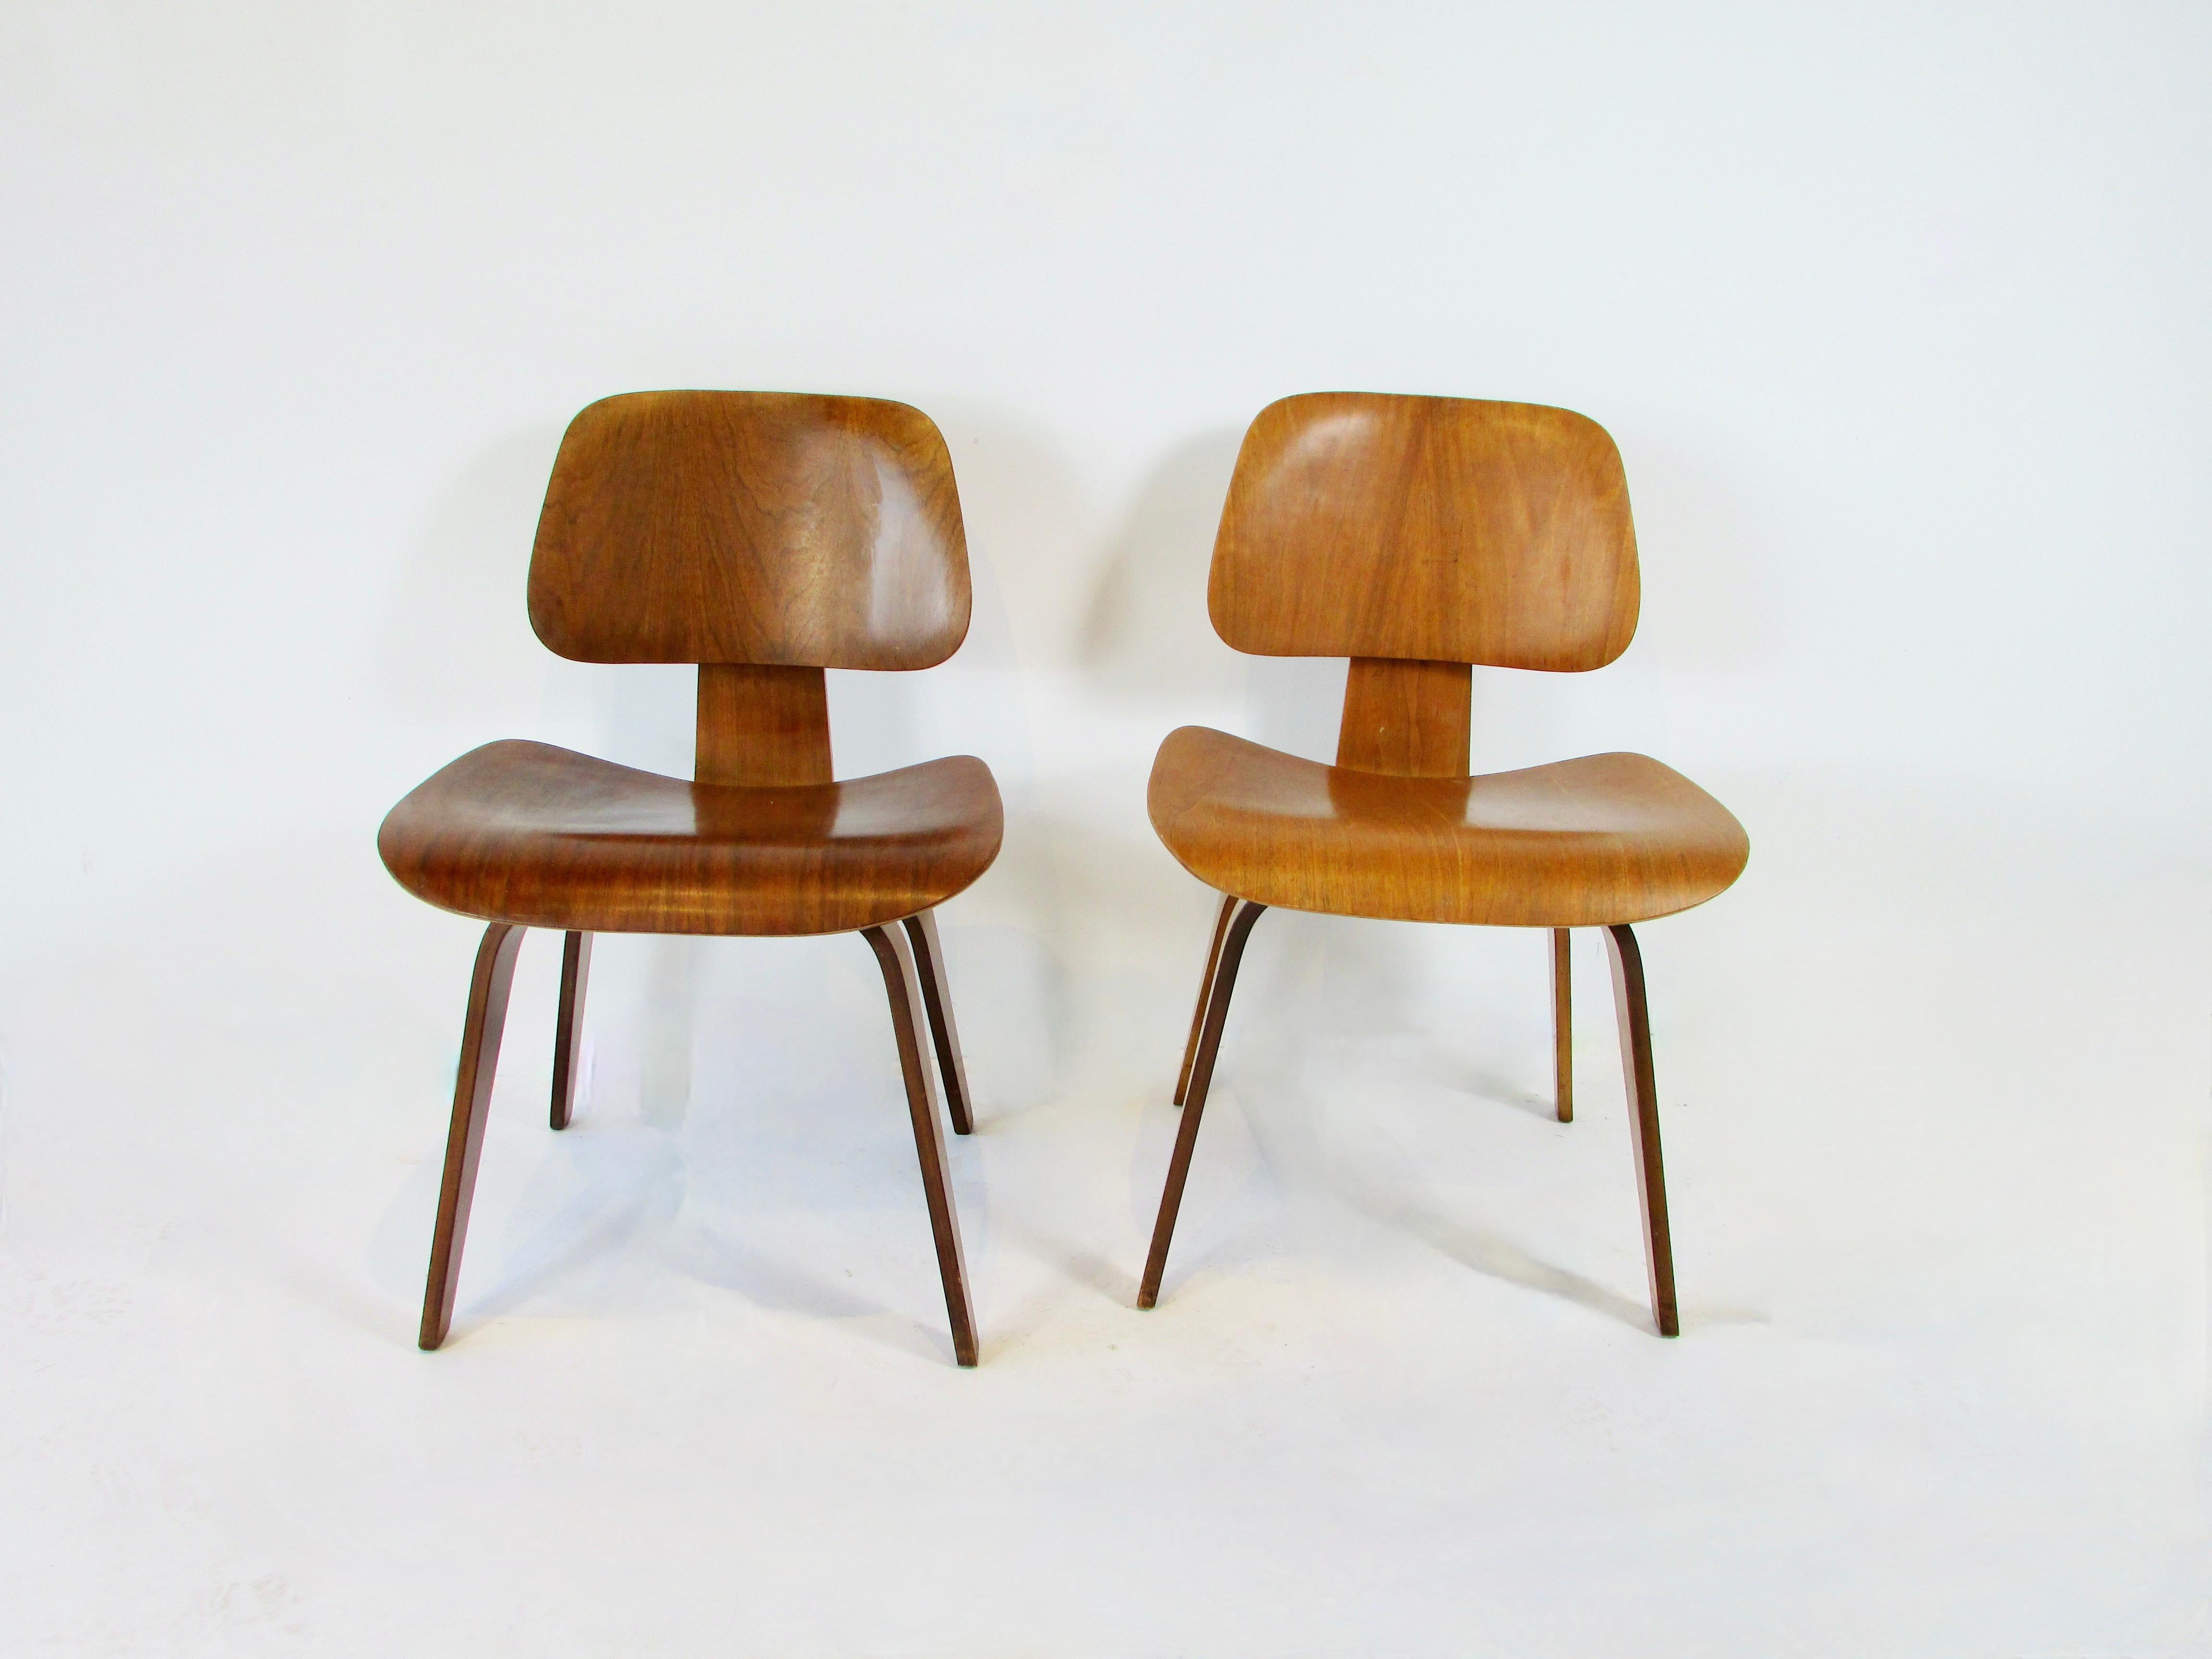 Two Herman Miller DCW ( dining chair wood ) chairs . From the Charles and Ray Eames office design studio . Both chairs are Walnut finish . They are priced individually . Estate fresh in original worn finish .